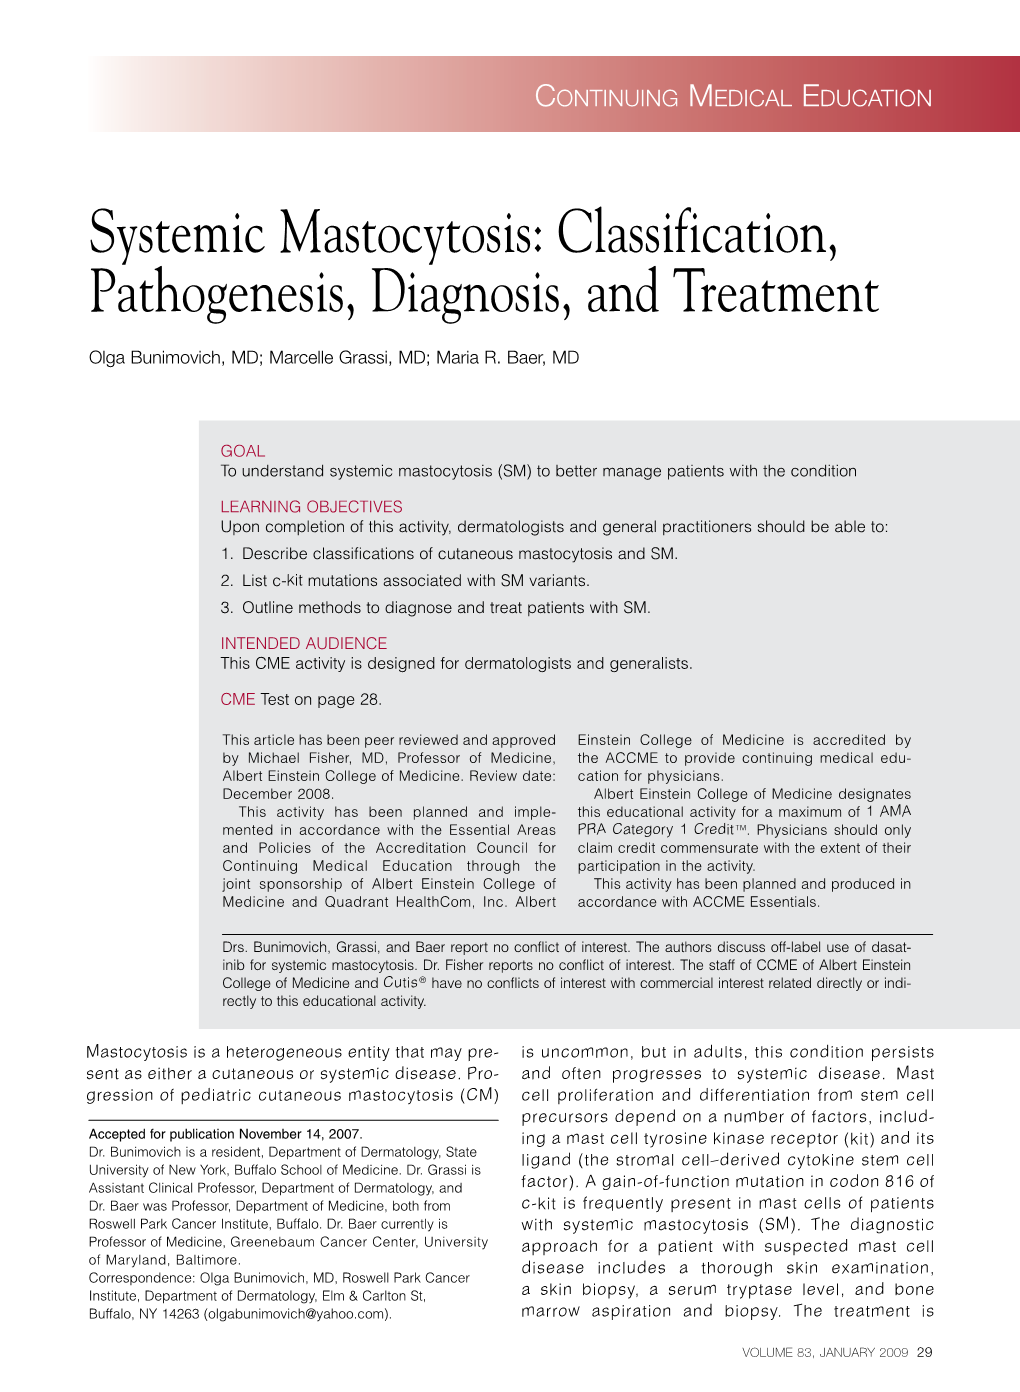 Systemic Mastocytosis: Classification, Pathogenesis, Diagnosis, and Treatment